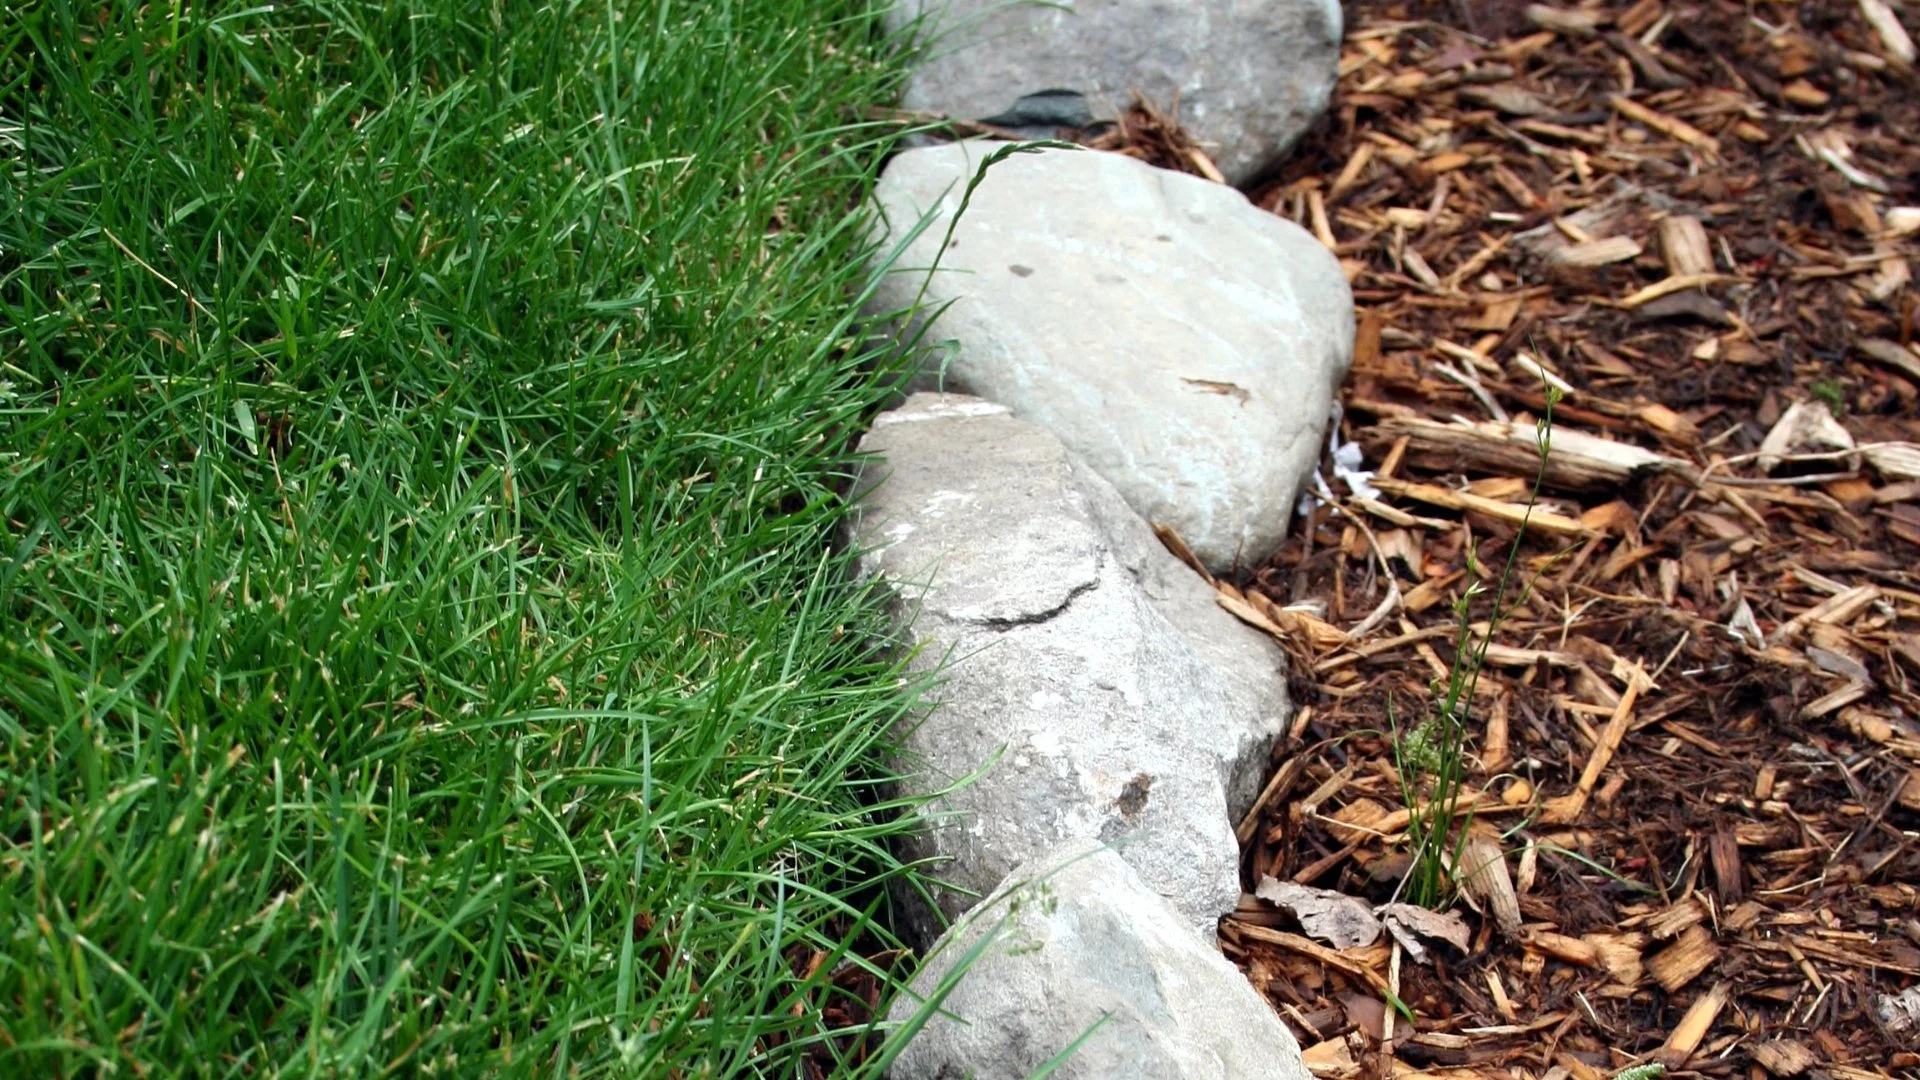 Mulch vs Rock - Which Ground Cover Is Better for Your Landscape Beds?